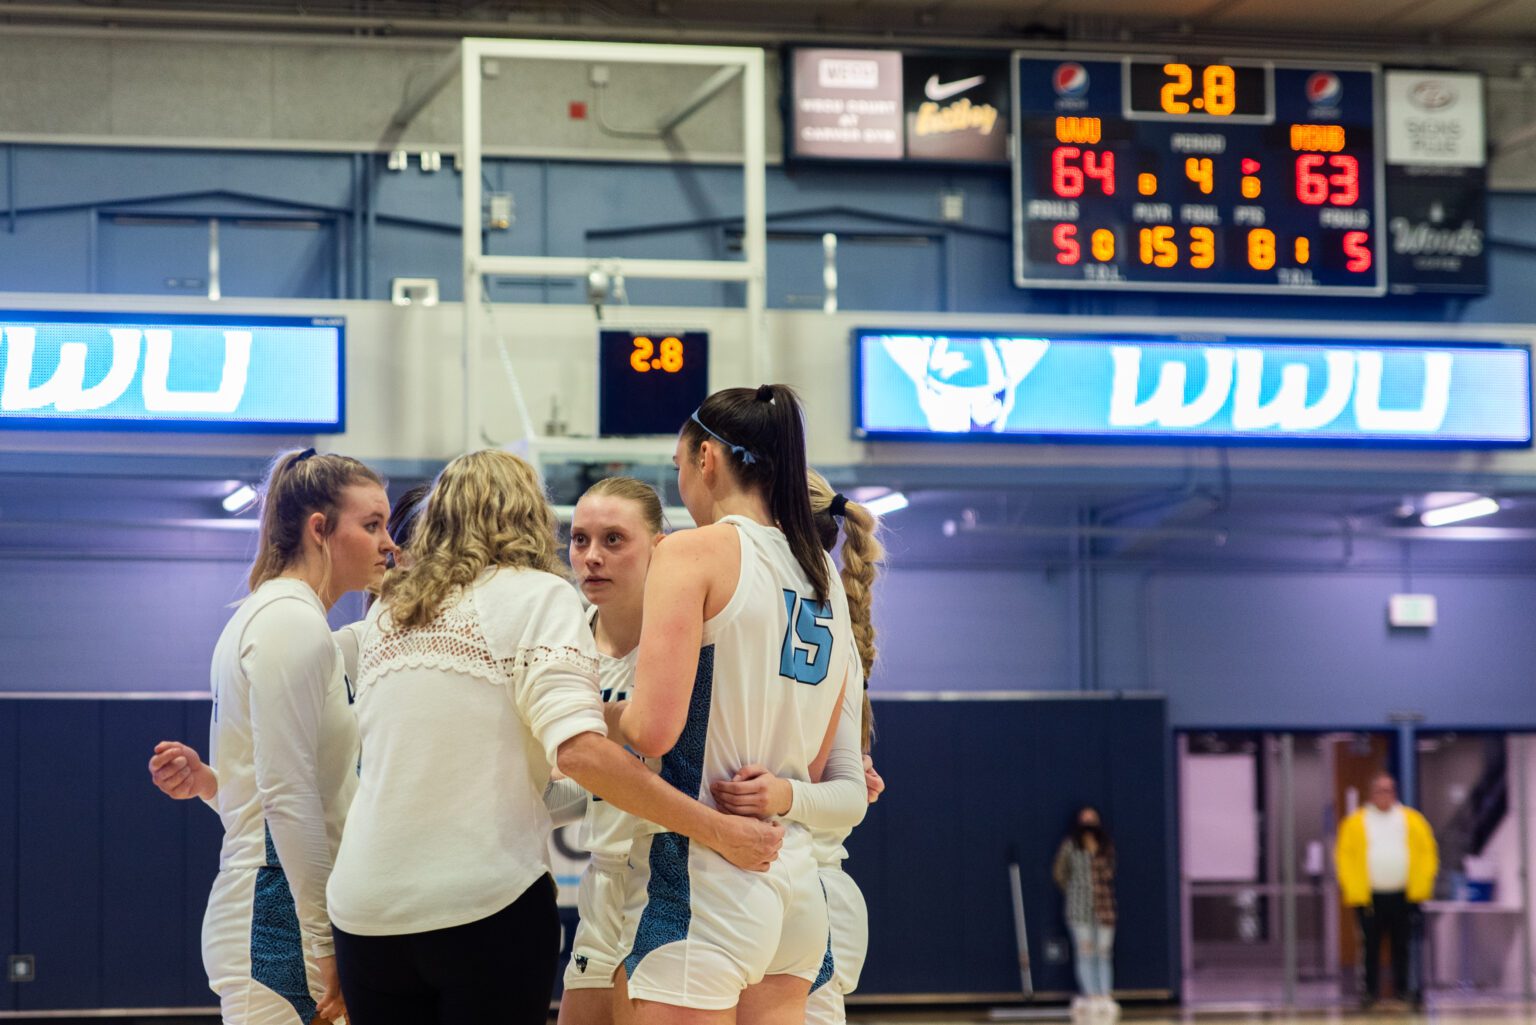 Western Washington University women's basketball team huddles Feb. 16 with less than three seconds left in overtime against Montana State University Billings. The Vikings lost the game 66-64 after MSUB sank a three-pointer right before the buzzer.